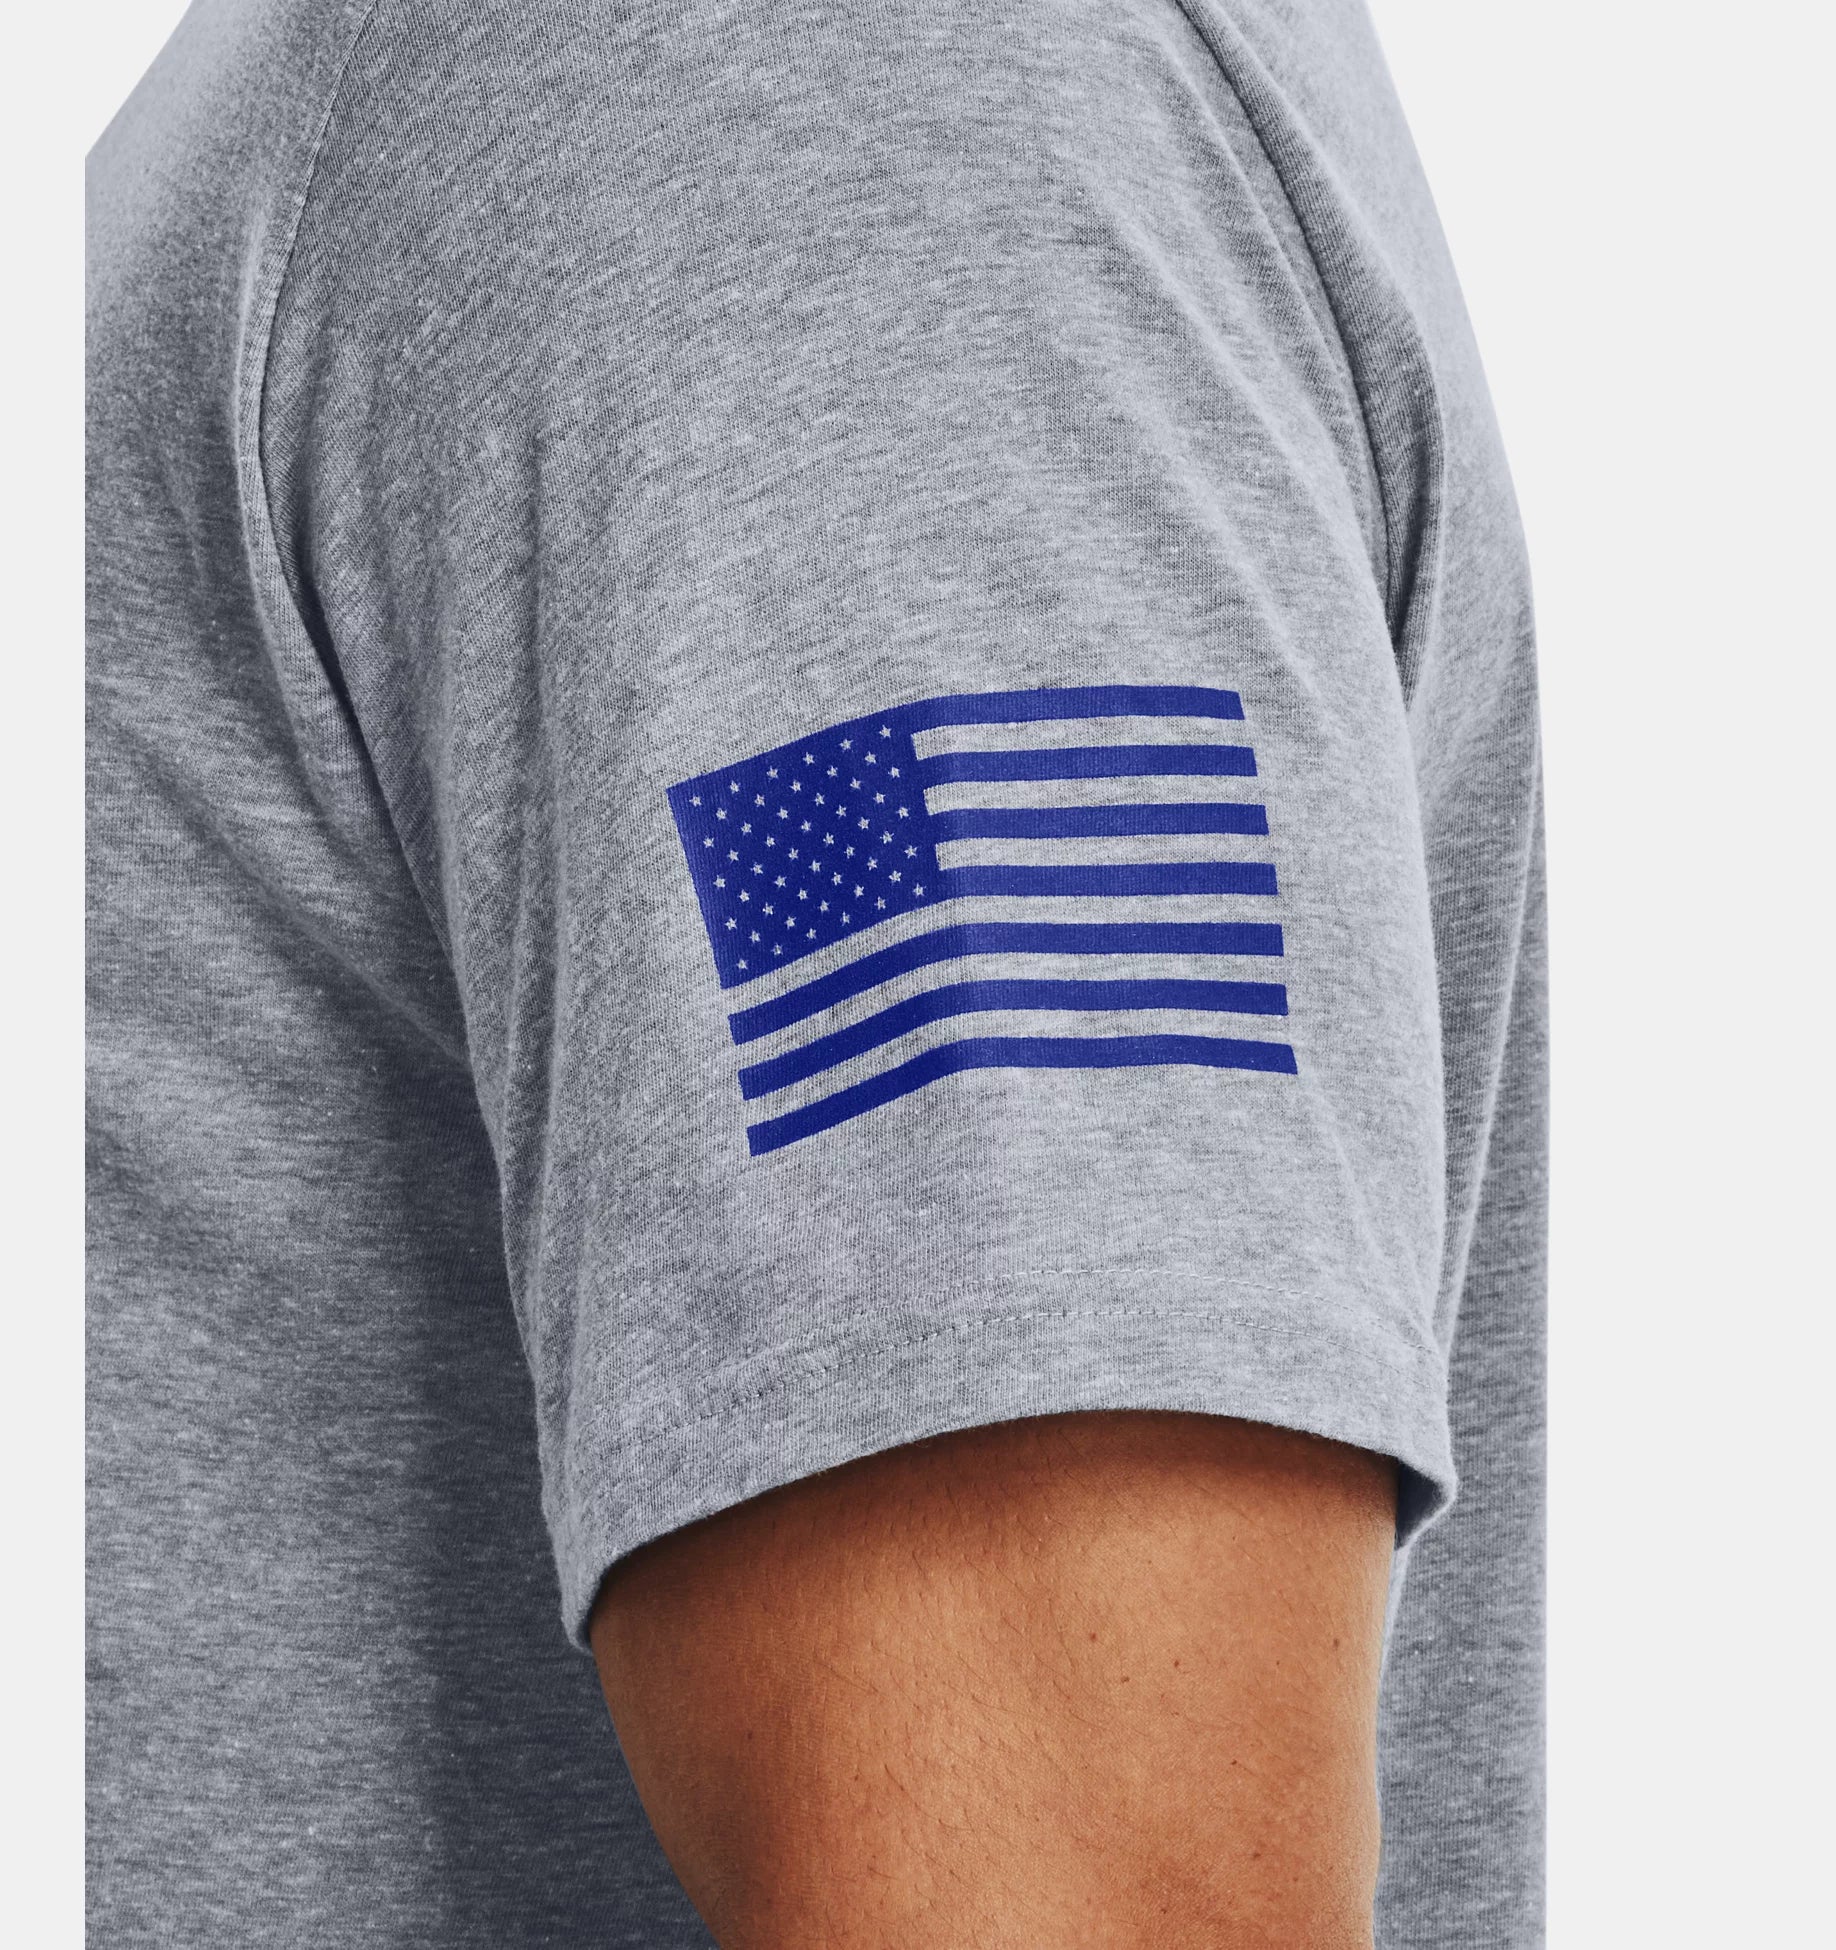 Under Armour UA Freedom Flag Gradient T-Shirt 1377056 - Newest Arrivals